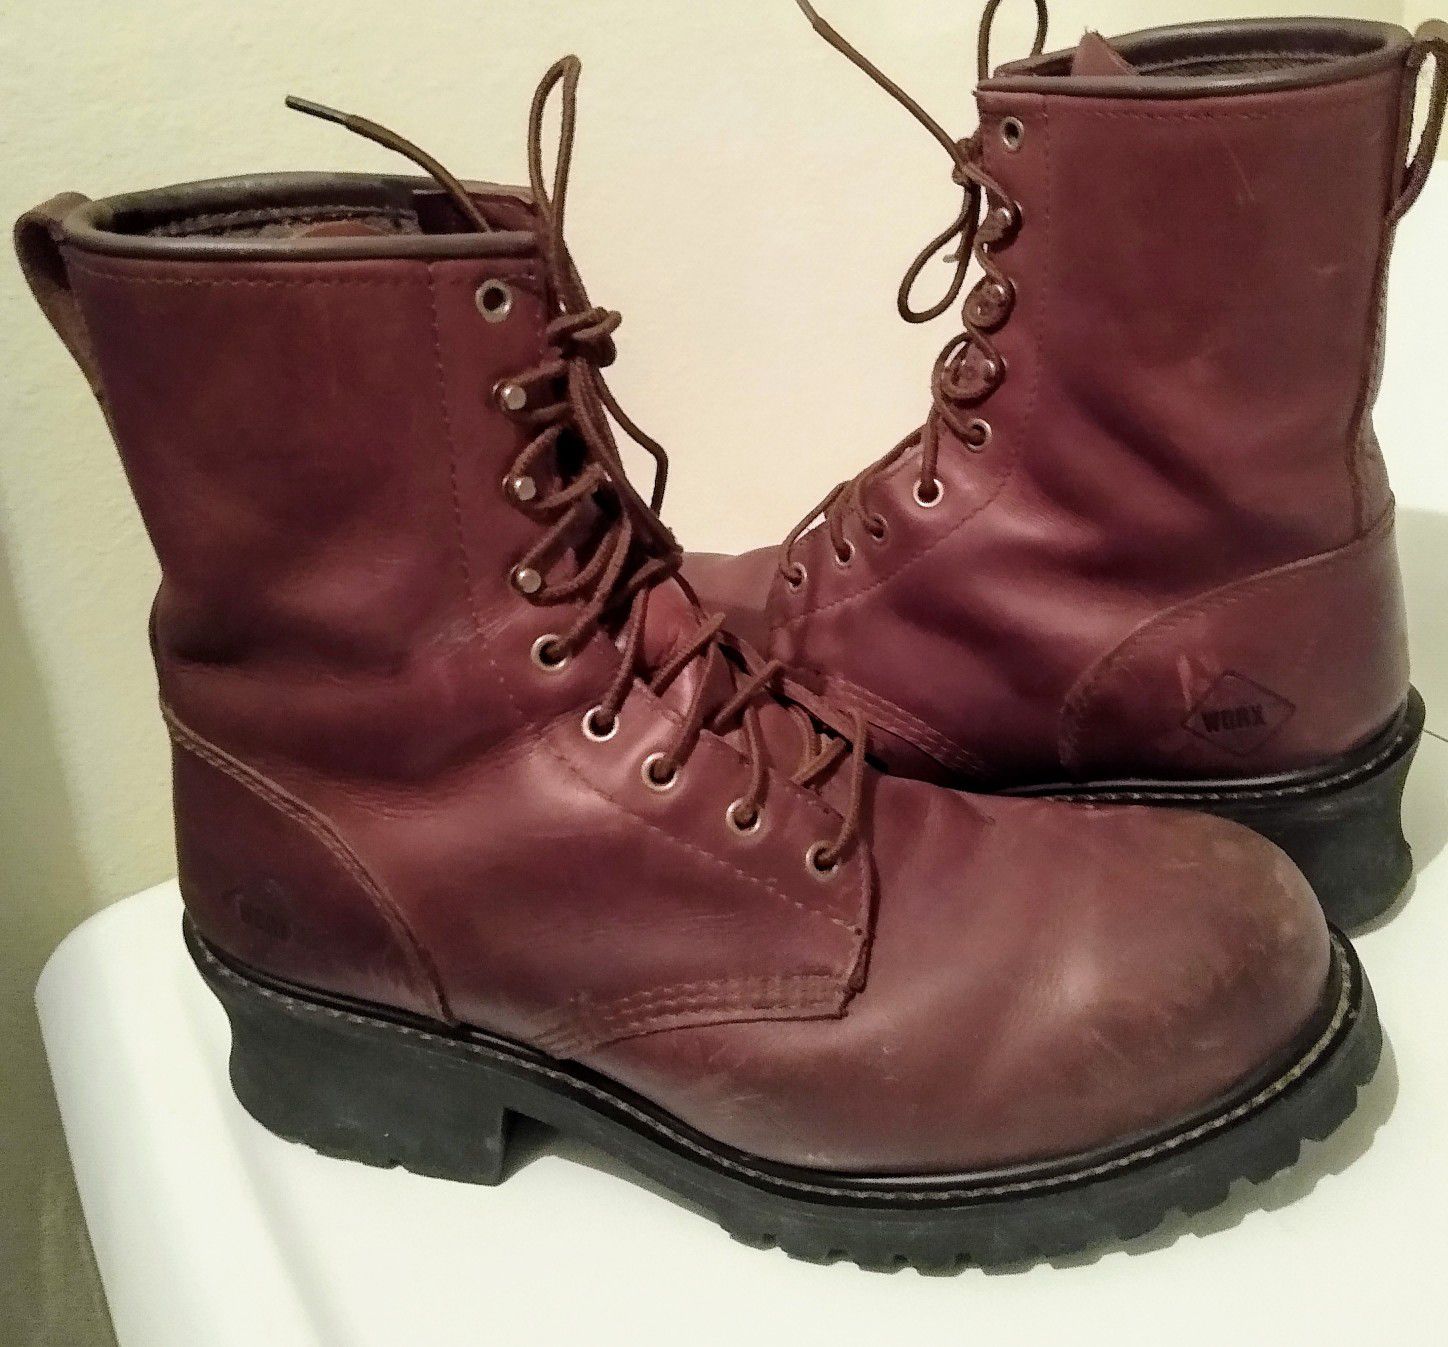 Worx by Red wing leather work boots size 11.5